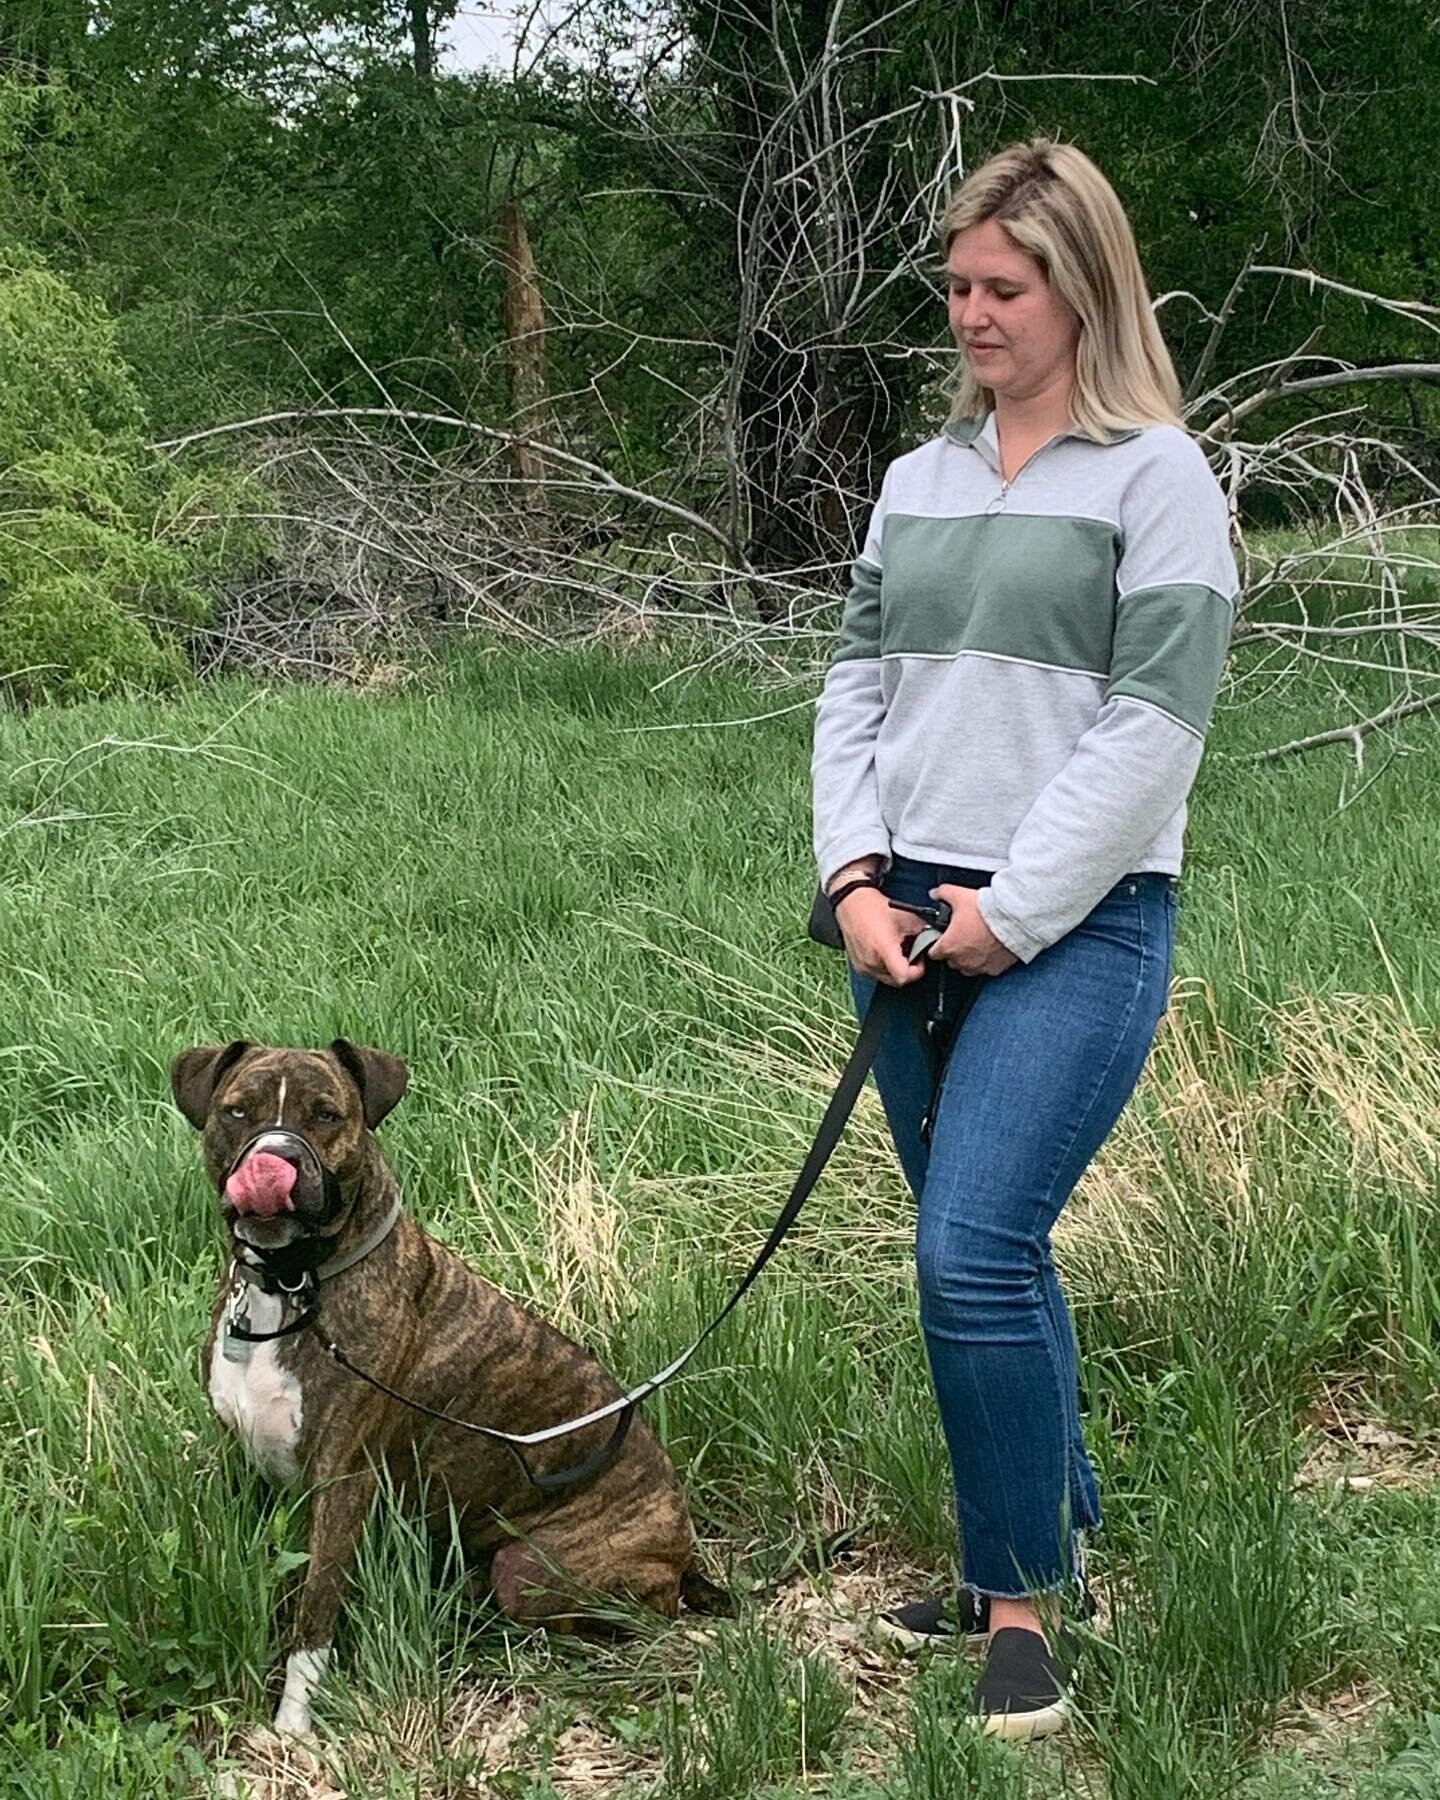 So proud of this team. 😍 Megan and Ollie have worked hard, consistently and confidently, to help Ollie with his enthusiasm for life, other dogs and people. Megan is always willing to practice and support this good boy and we remain committed to supp